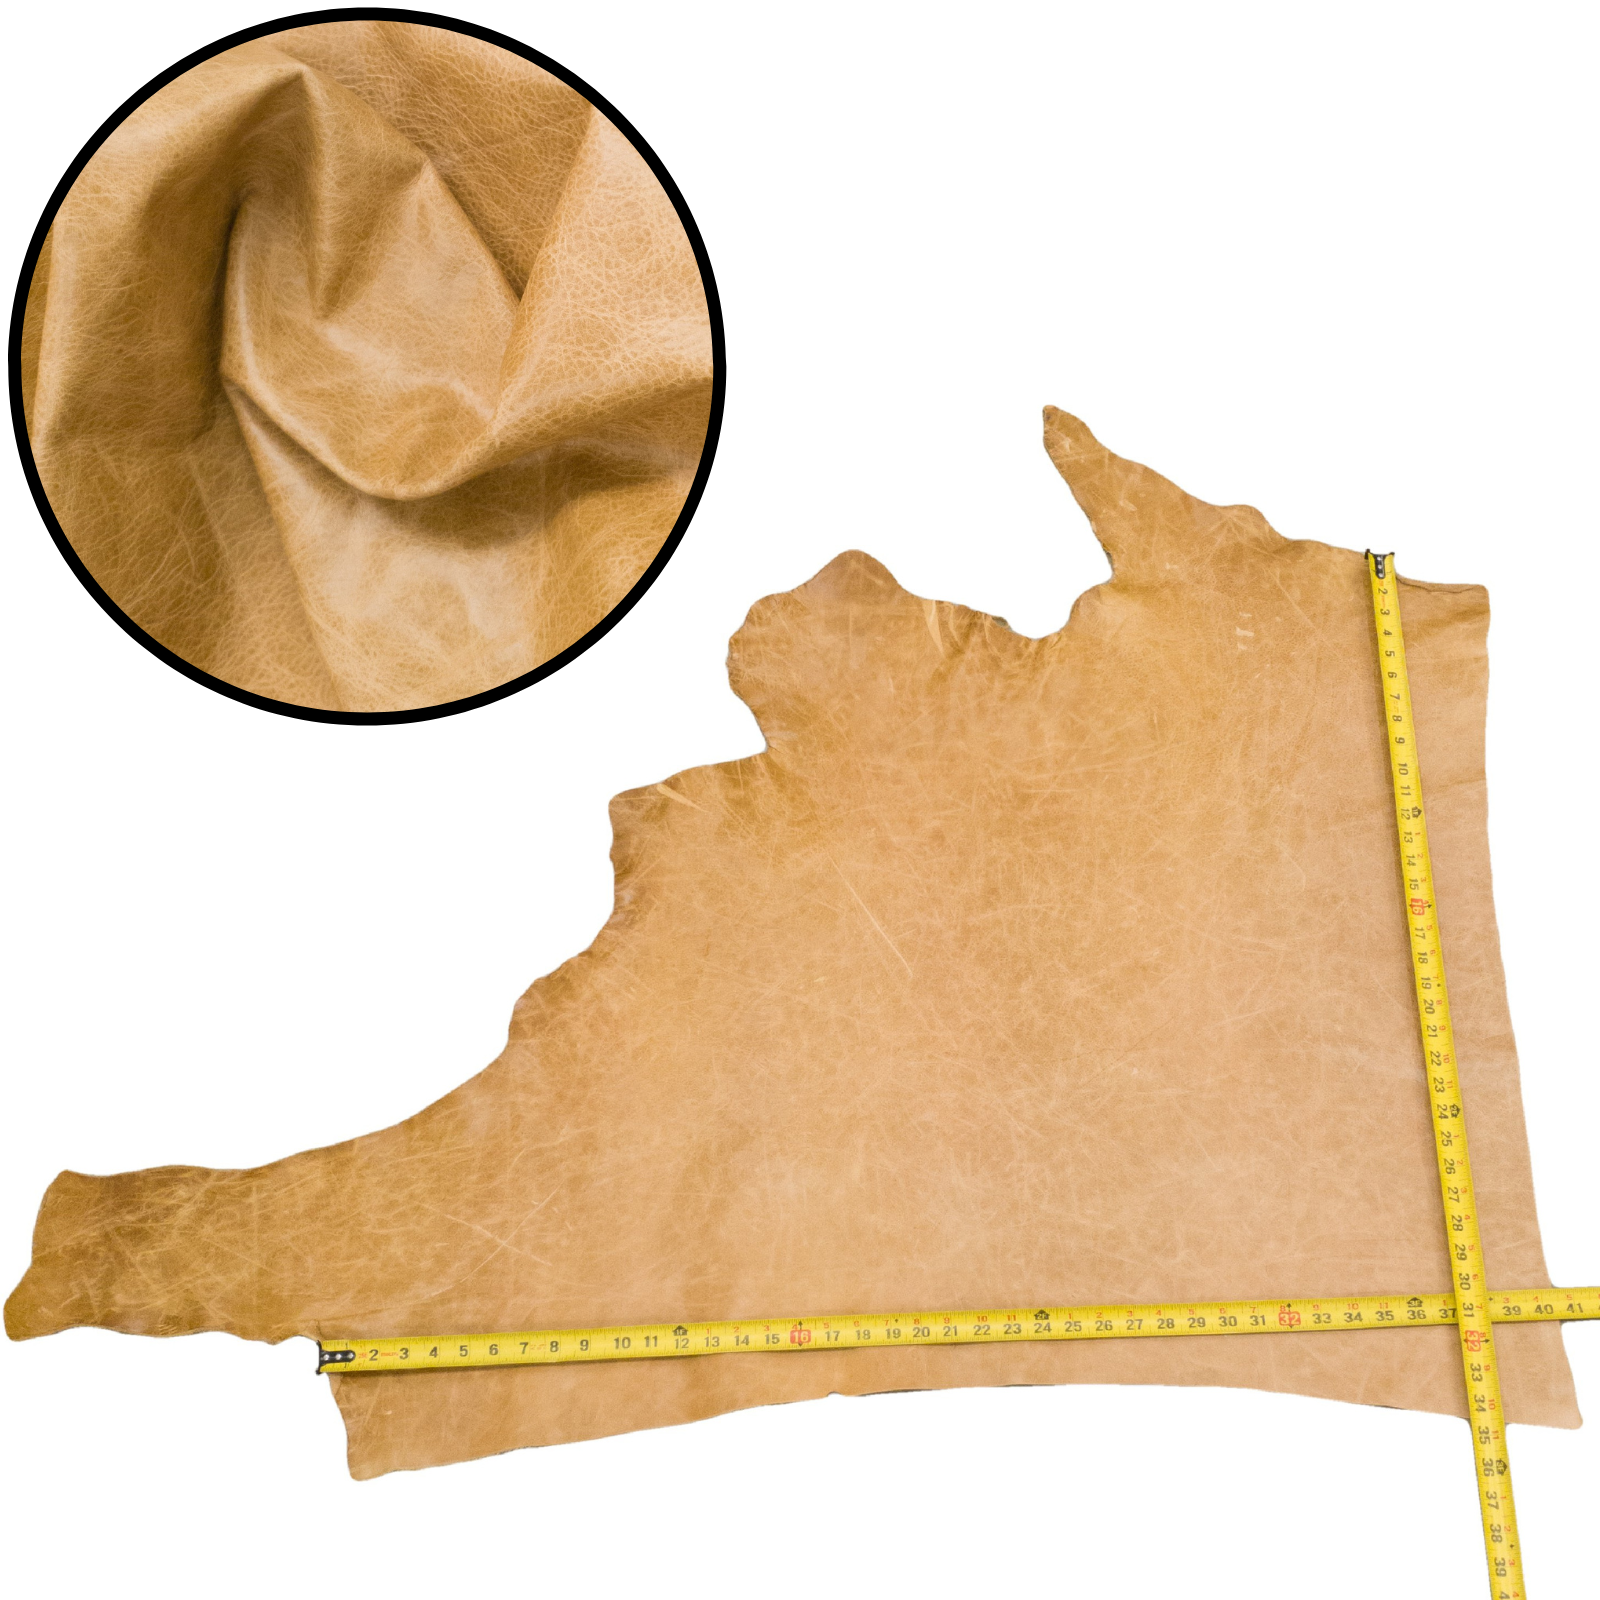 Light Browns, 4-20 Sq Ft Upholstery Cowhide Project Pieces, Beach Sand / 7 / 2 | The Leather Guy